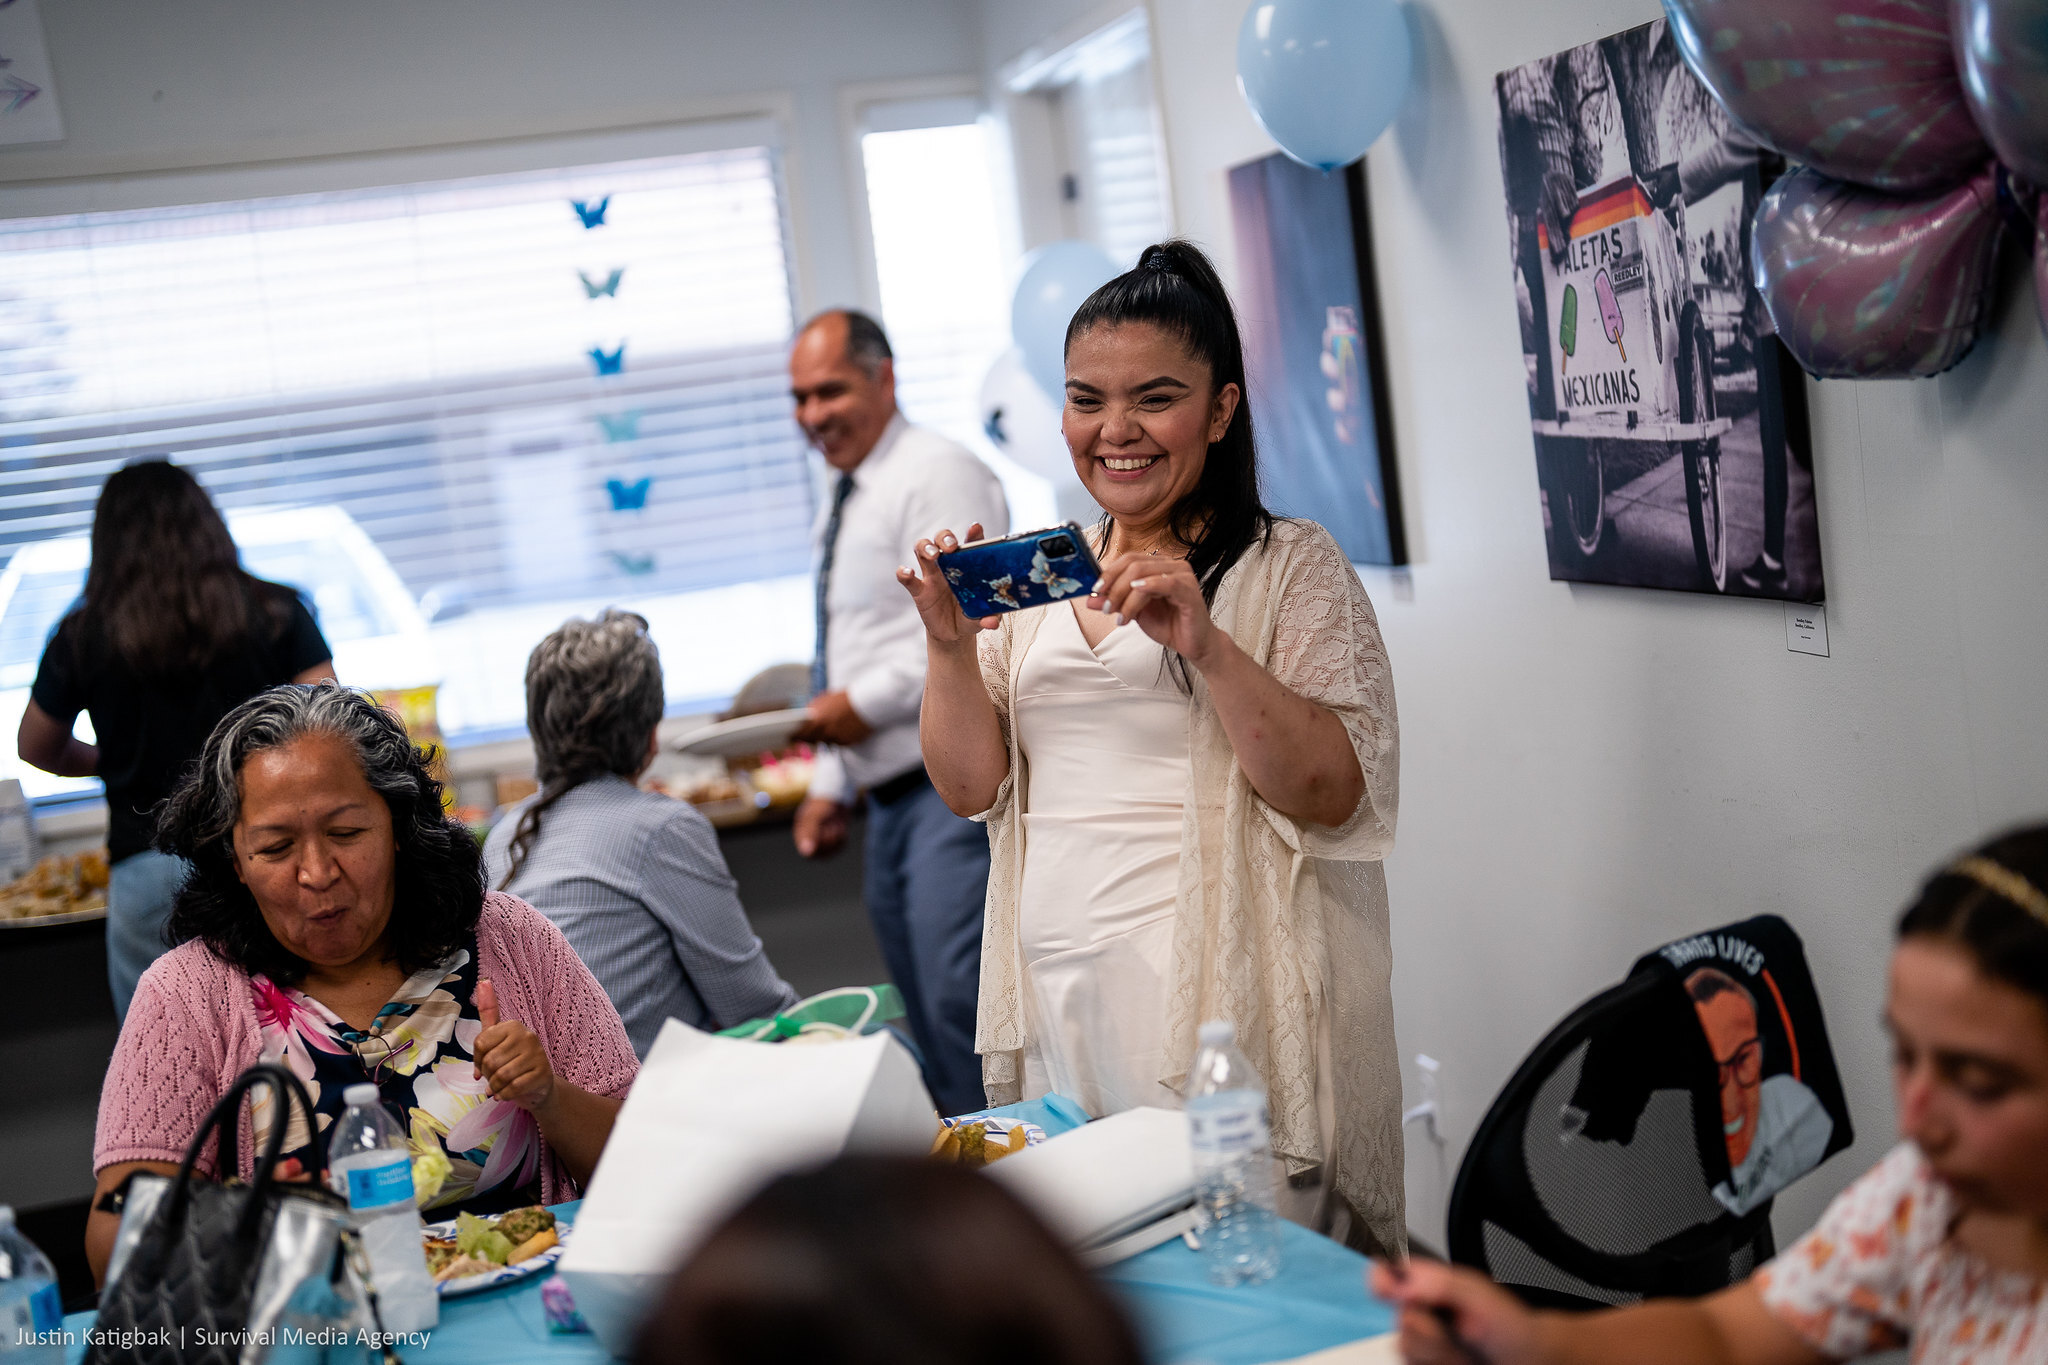 Marisela Andrade takes photos of friends, family, and supporters at her birthday celebration (Justin Katigbak | Survival Media Agency)